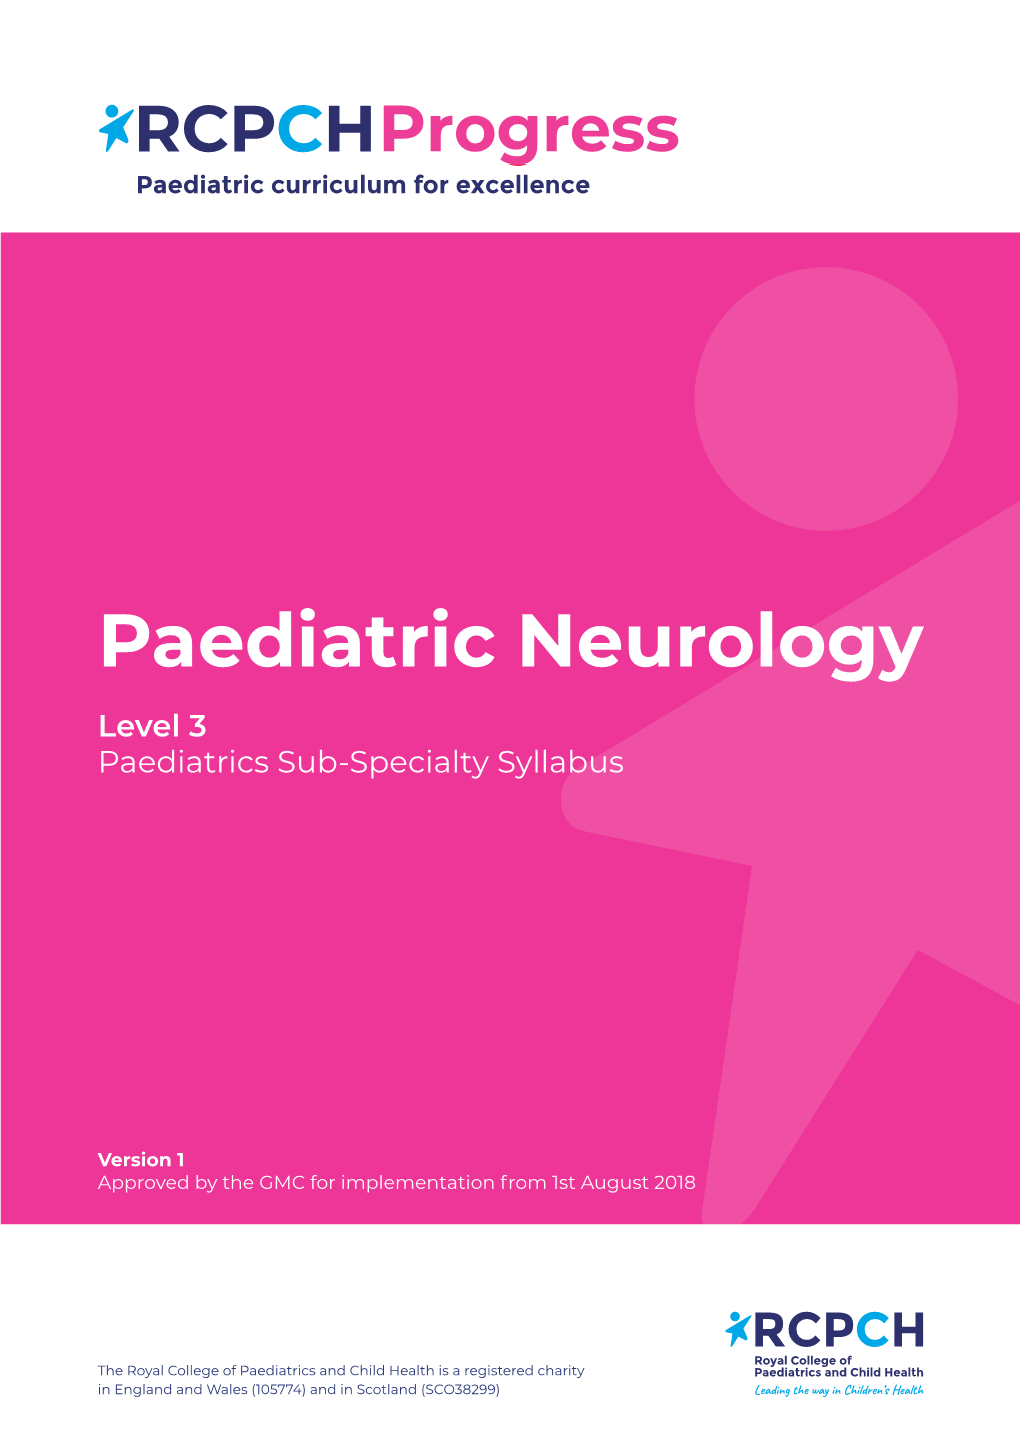 Paediatric Neurology Sub-Specialty Learning Outcomes Introductory Statement